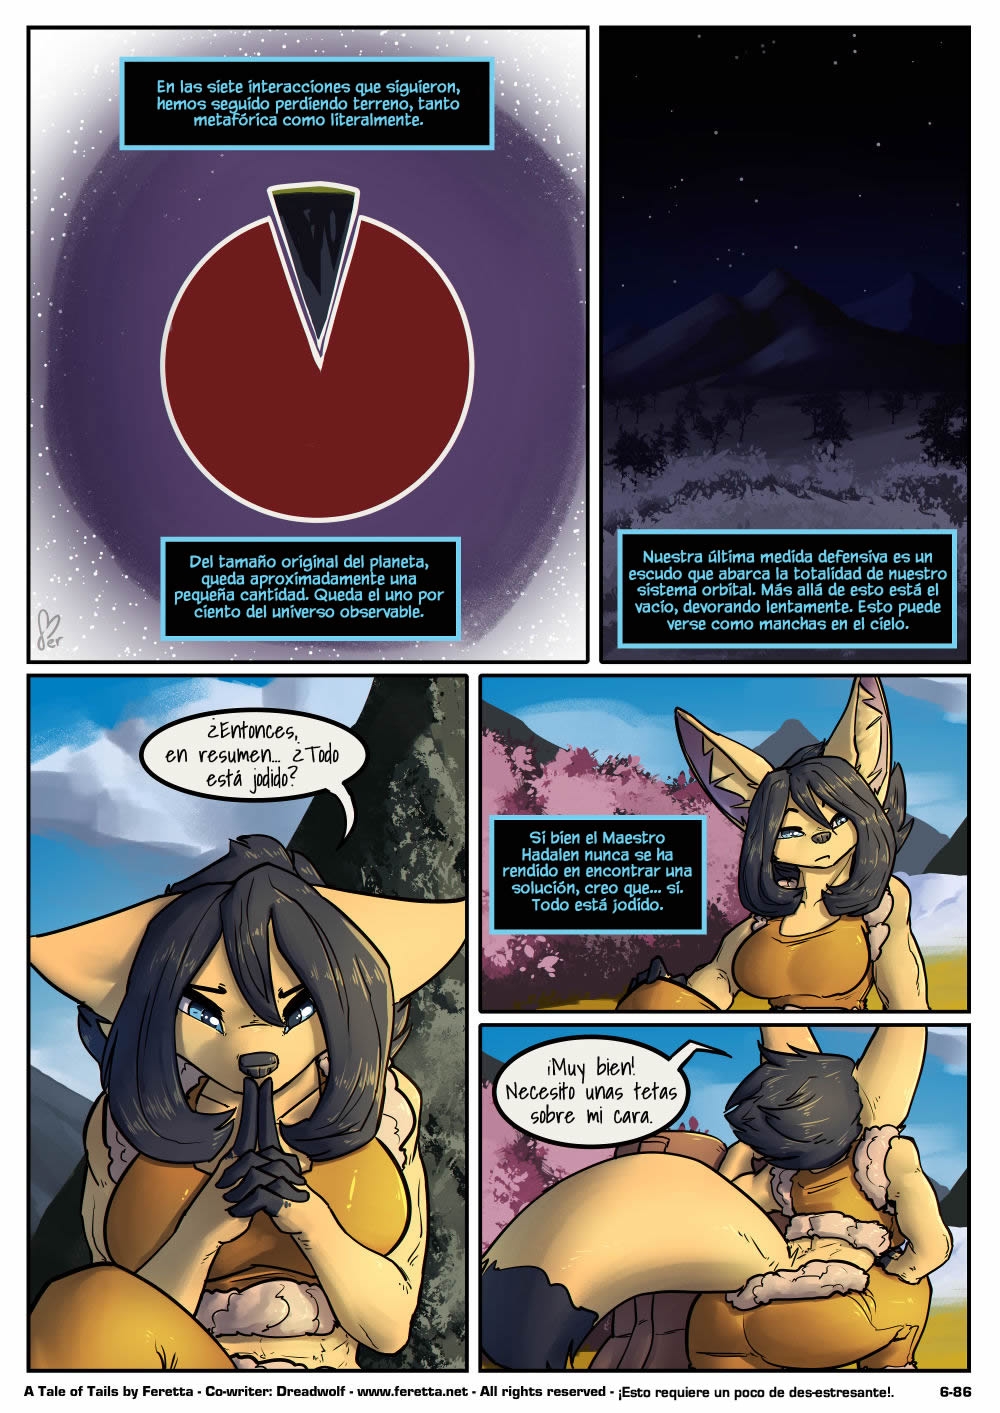 [Feretta] A Tale of Tails: Chapter 6 - Paths converge / Los caminos convergen [Spanish] [Red Fox Makkan] 86